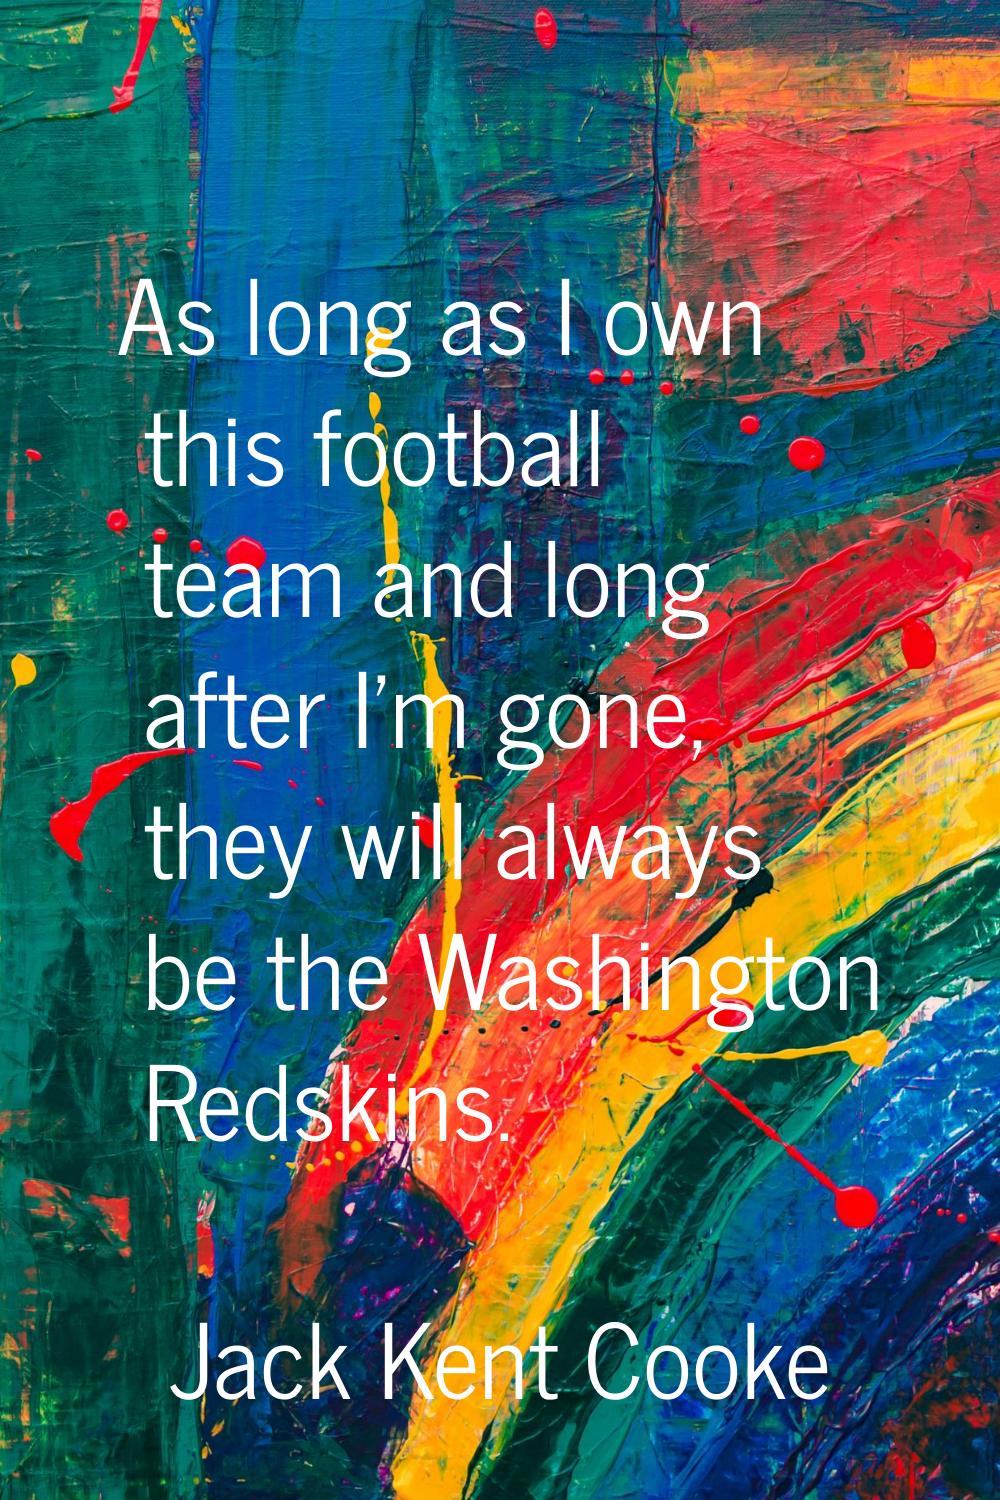 As long as I own this football team and long after I'm gone, they will always be the Washington Red